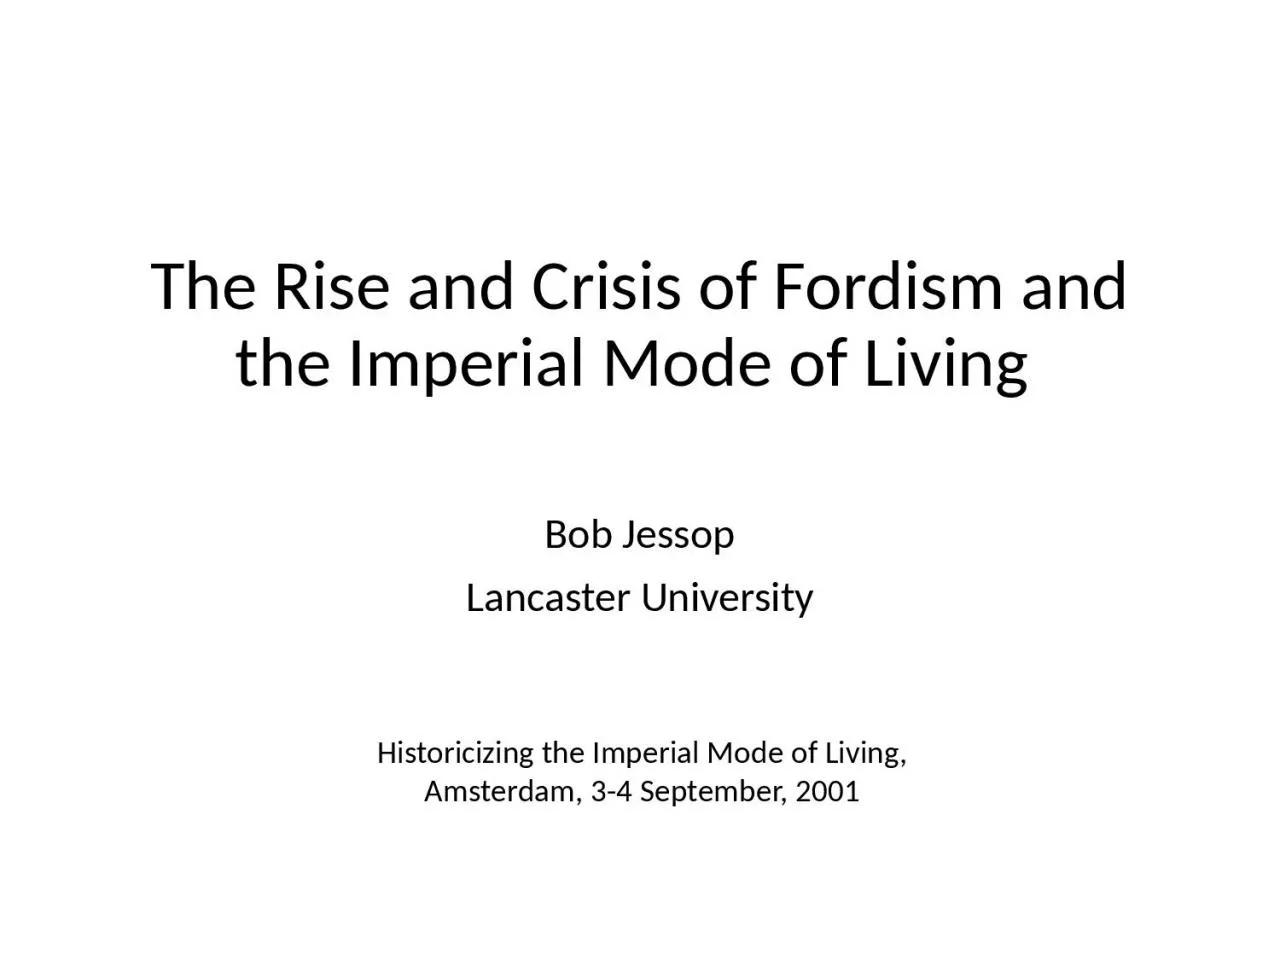 The Rise and Crisis of Fordism and the Imperial Mode of Living